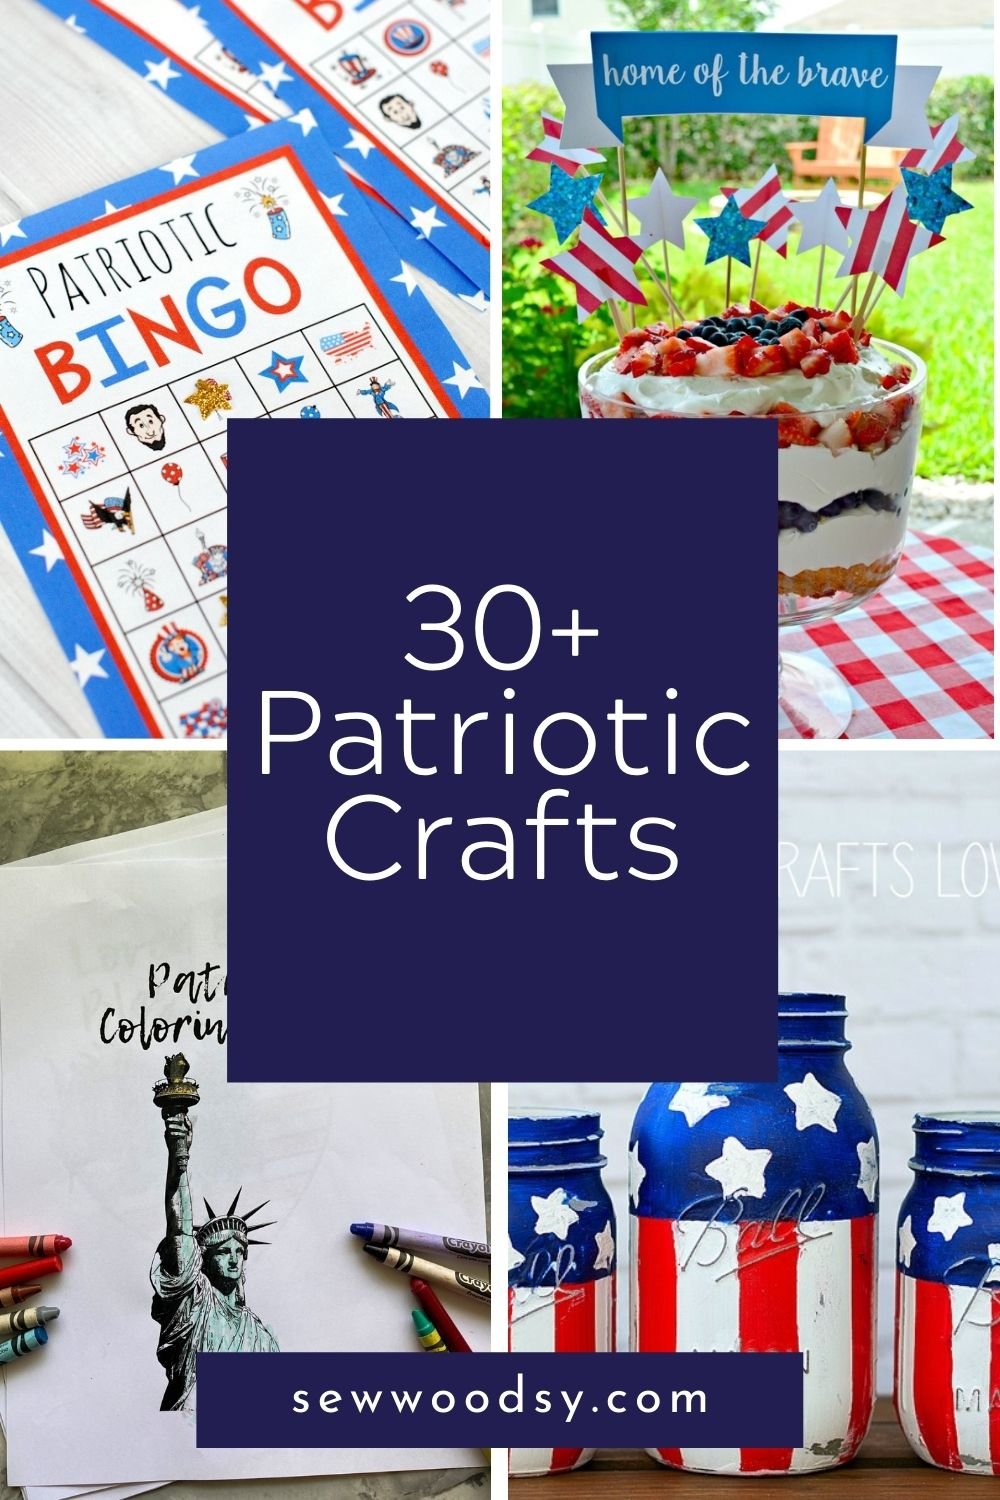 Four photos of Patriotic Crafts; bingo, topper, mason jars, and coloring pages with text on image for Pinterest.